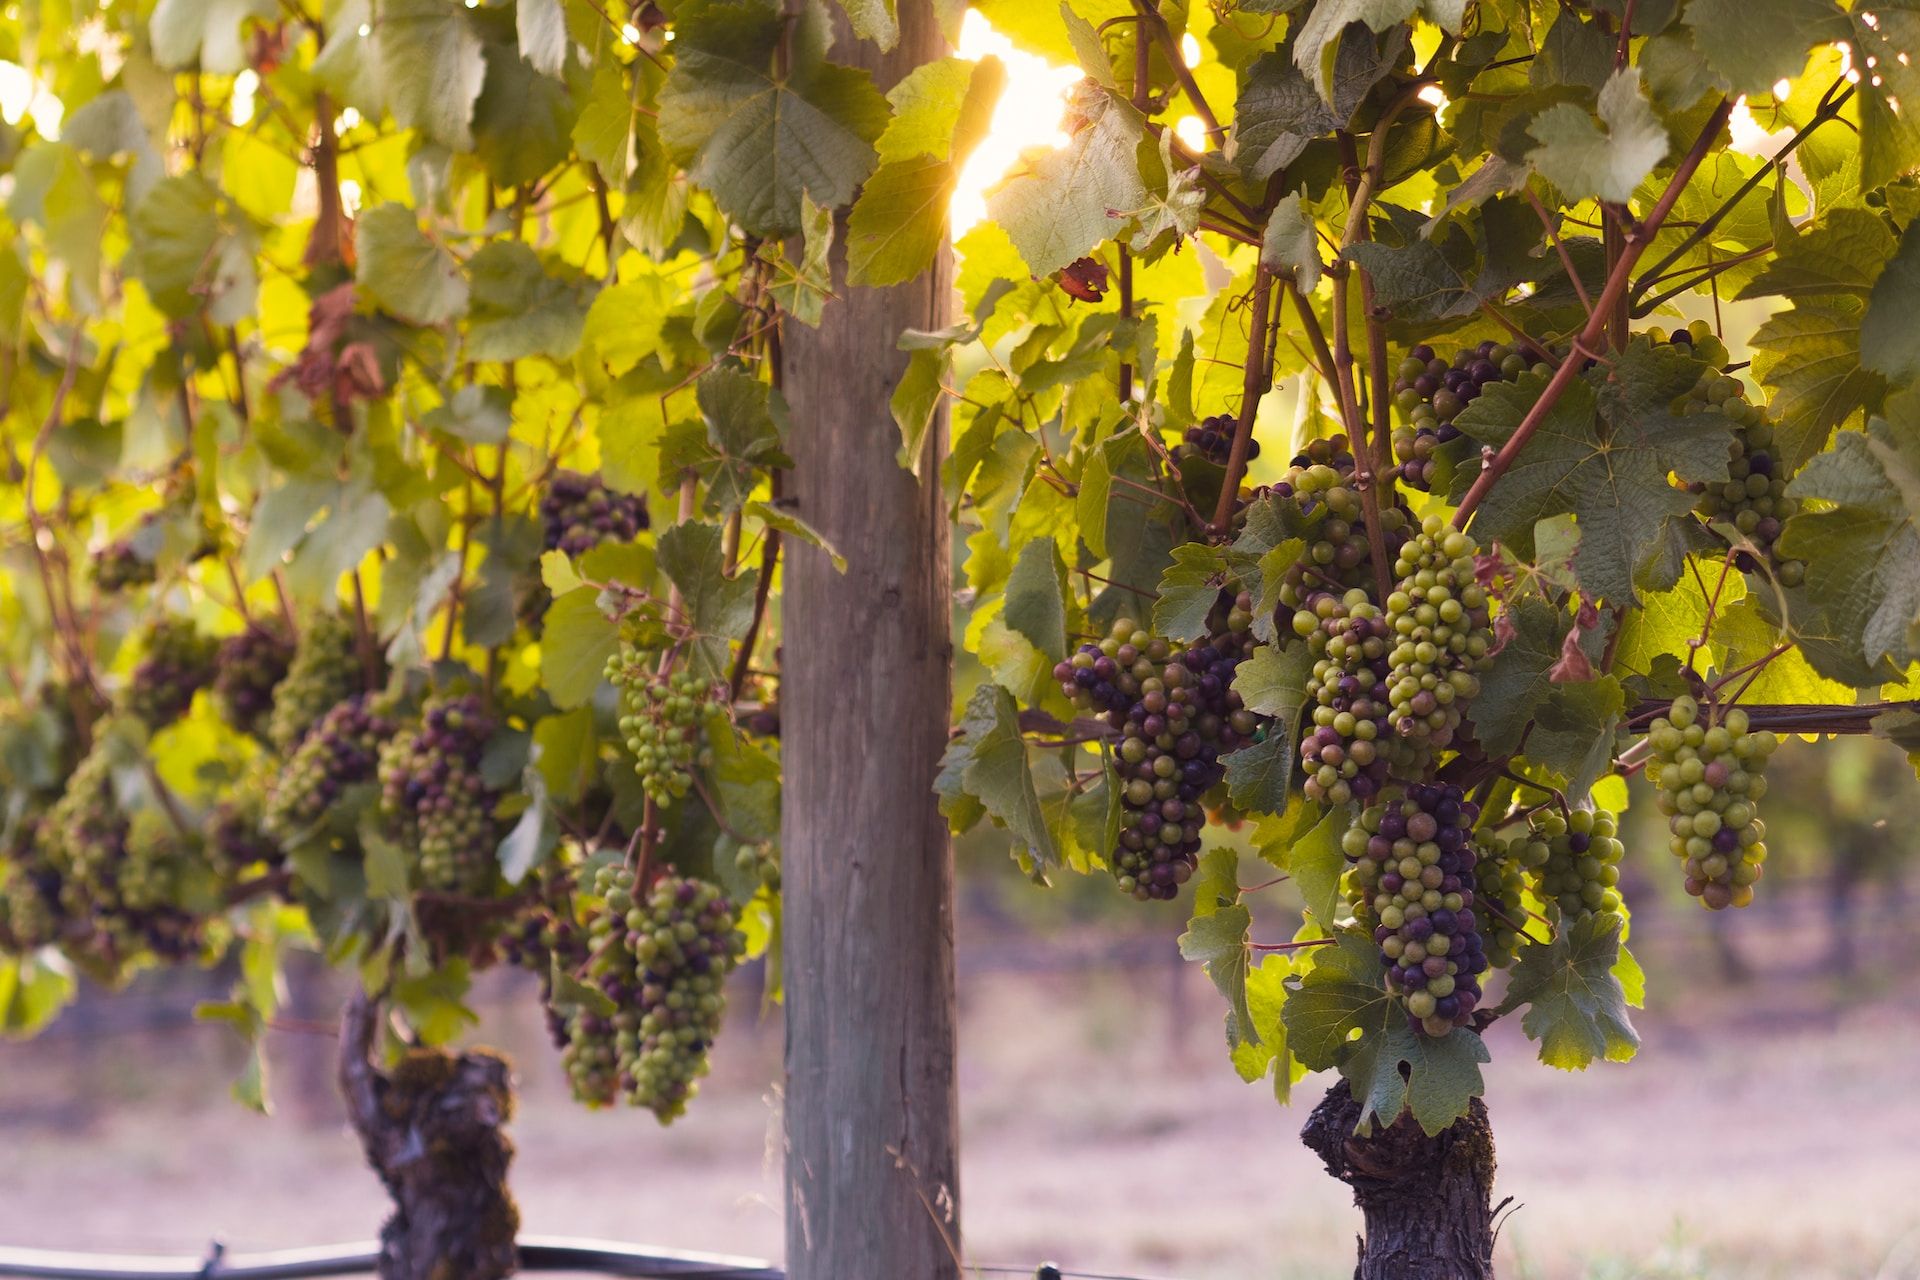 Bunches of grapes growing on vines at golden hour in the Willamette Valley